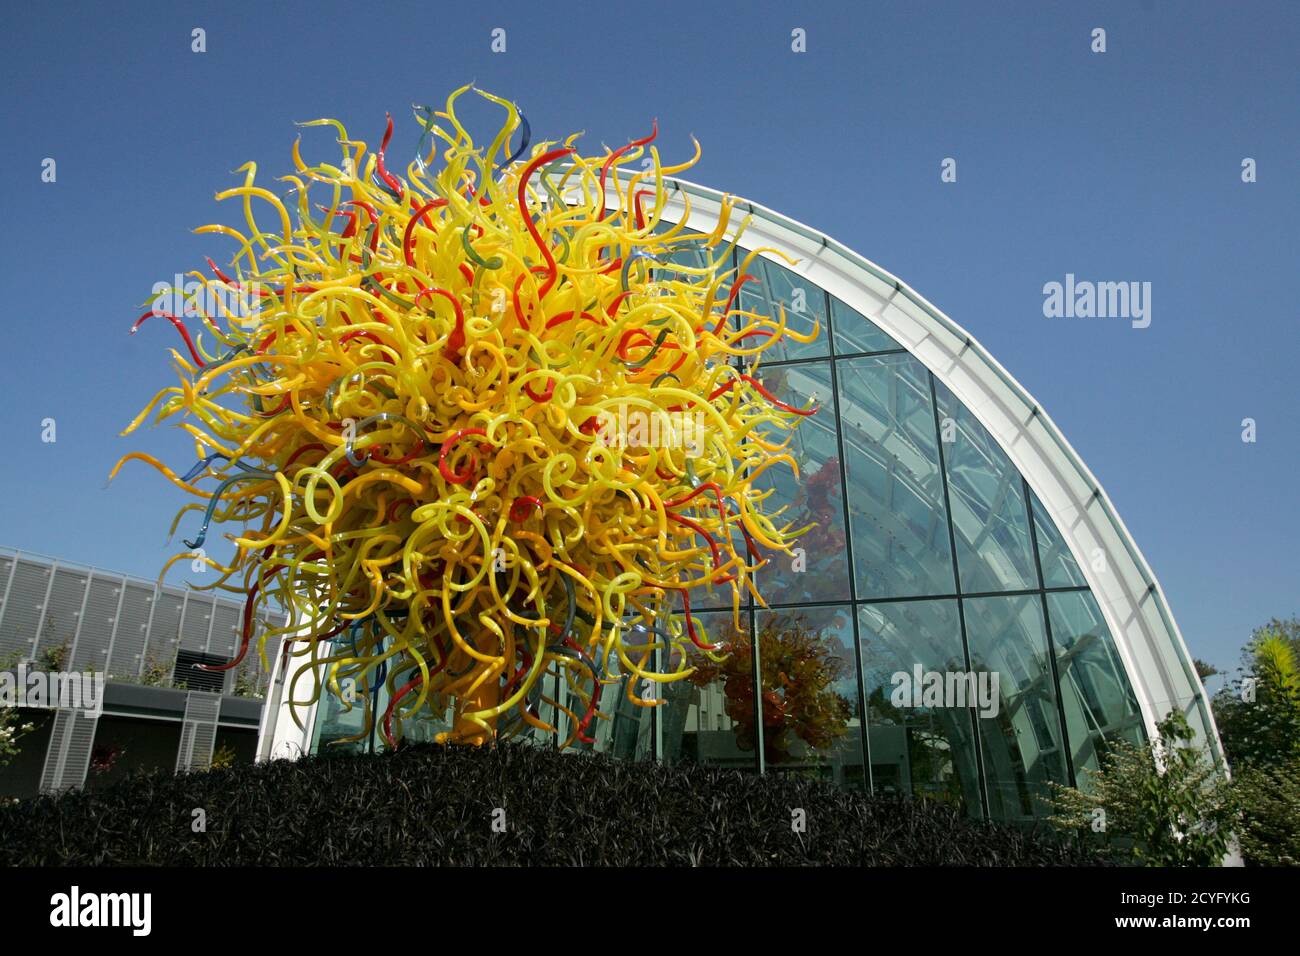 The Seattle Sun by artist Dale Chihuly is on display at the Chihuly Garden  and Glass exhibit in Seattle, Washington, May 16, 2012. Pioneering glass  artist Dale Chihuly, whose work has been